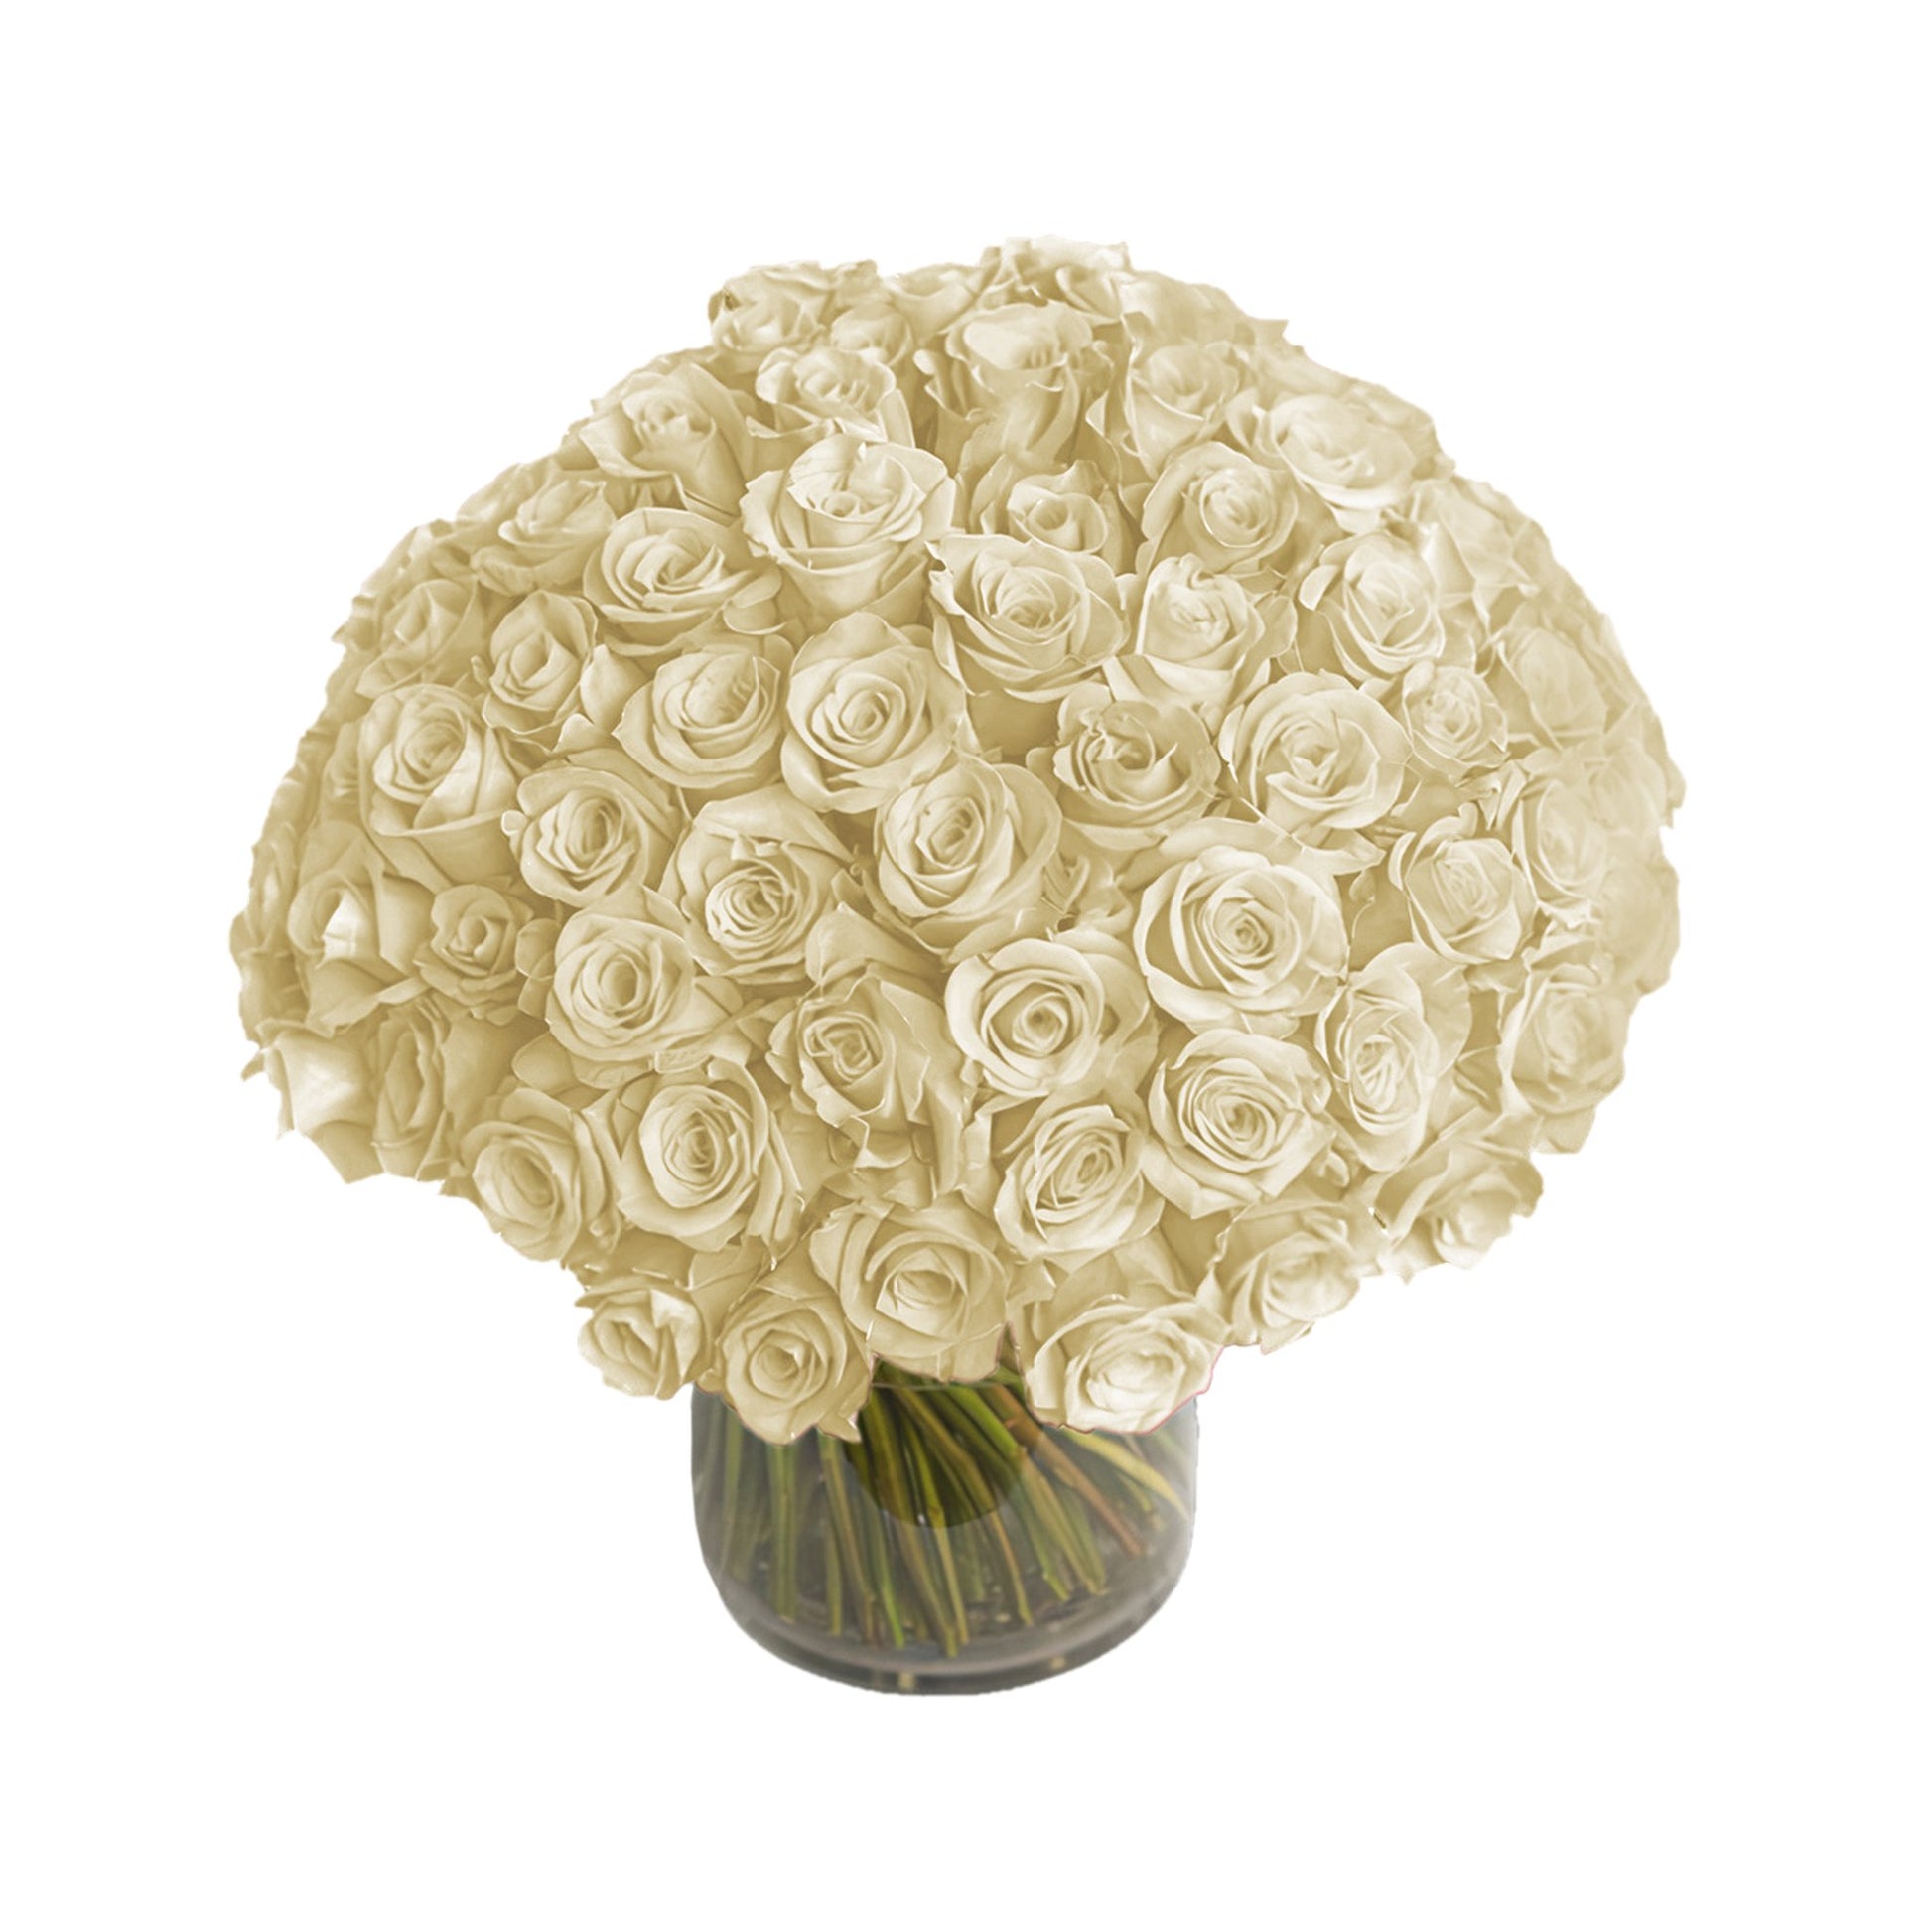 NYC Flower Delivery - Fresh Roses in a Vase | 100 White Roses - Roses